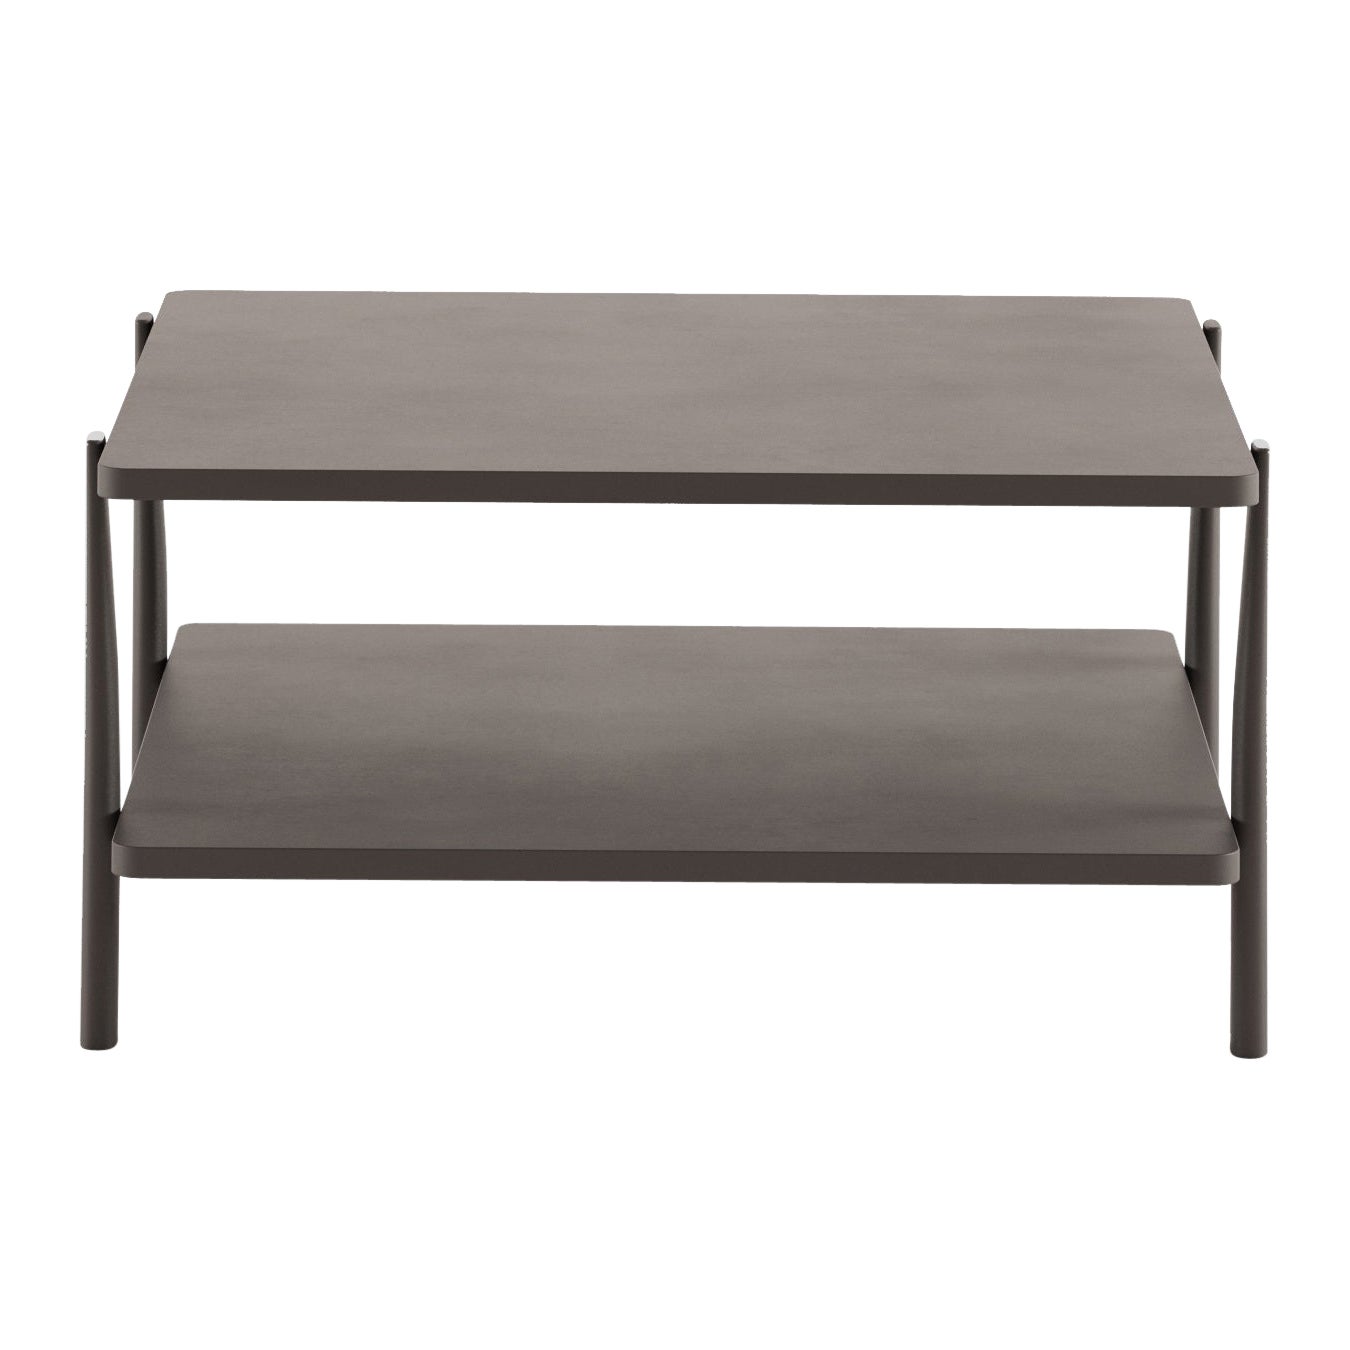 Alias 954 Eleven Low Table Double Square in Graphite Grey Lacquered Frame For Sale